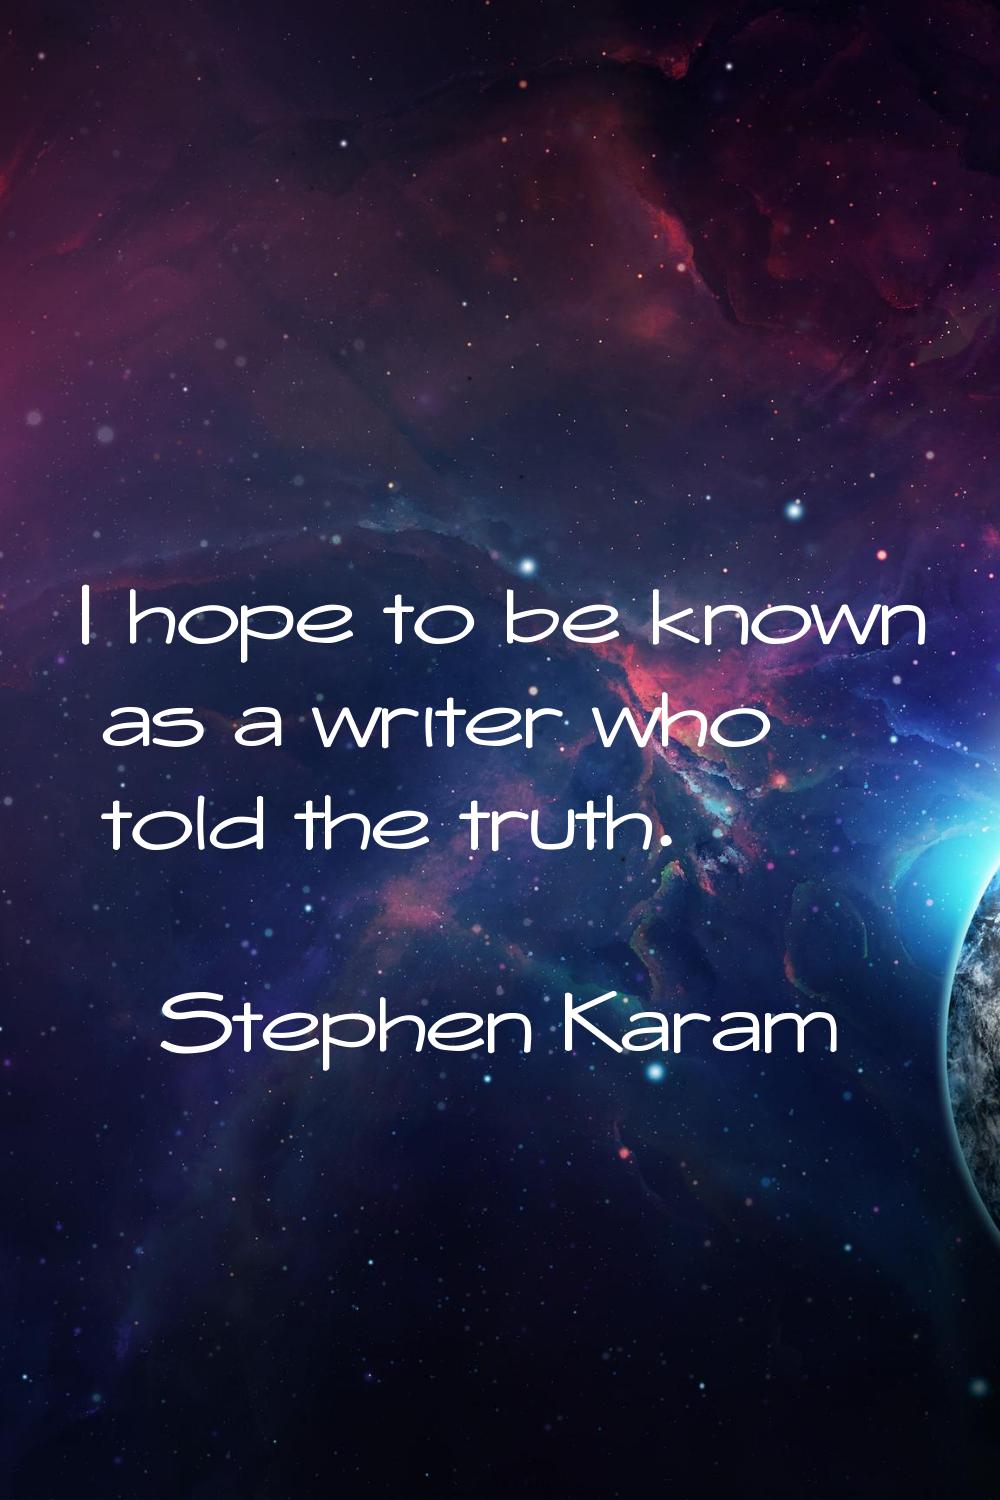 I hope to be known as a writer who told the truth.